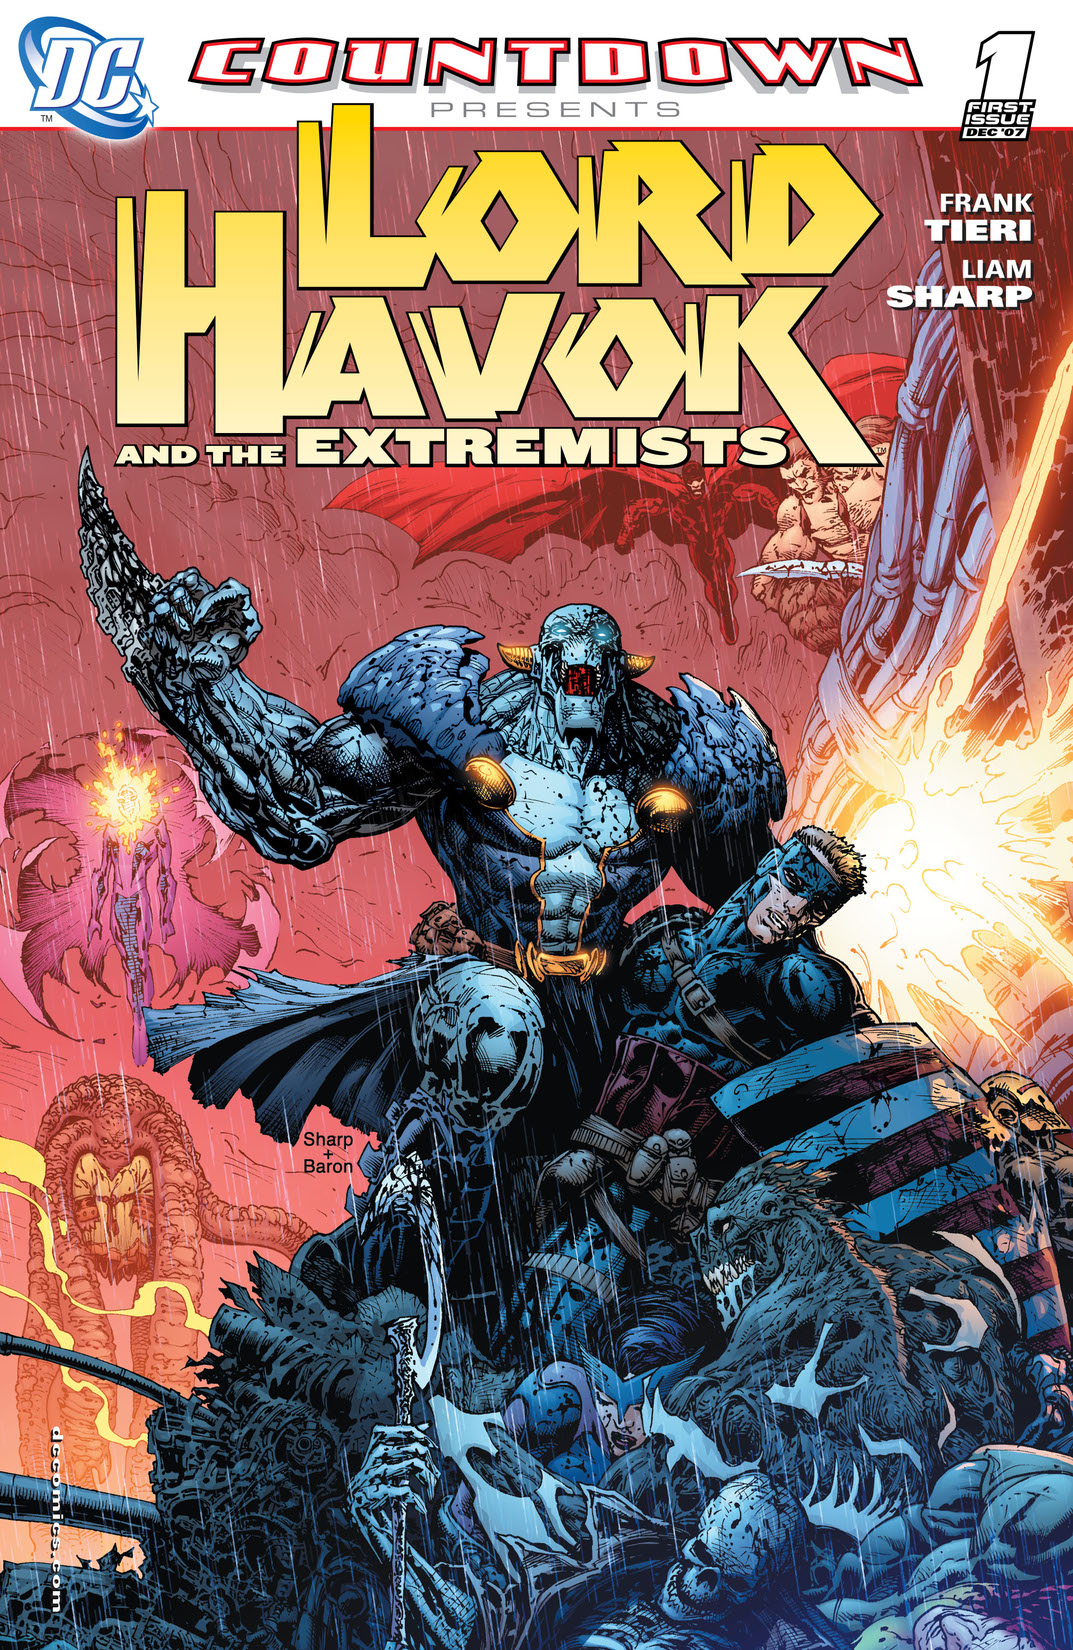 Countdown Presents: Lord Havok & the Extremists #1 preview images